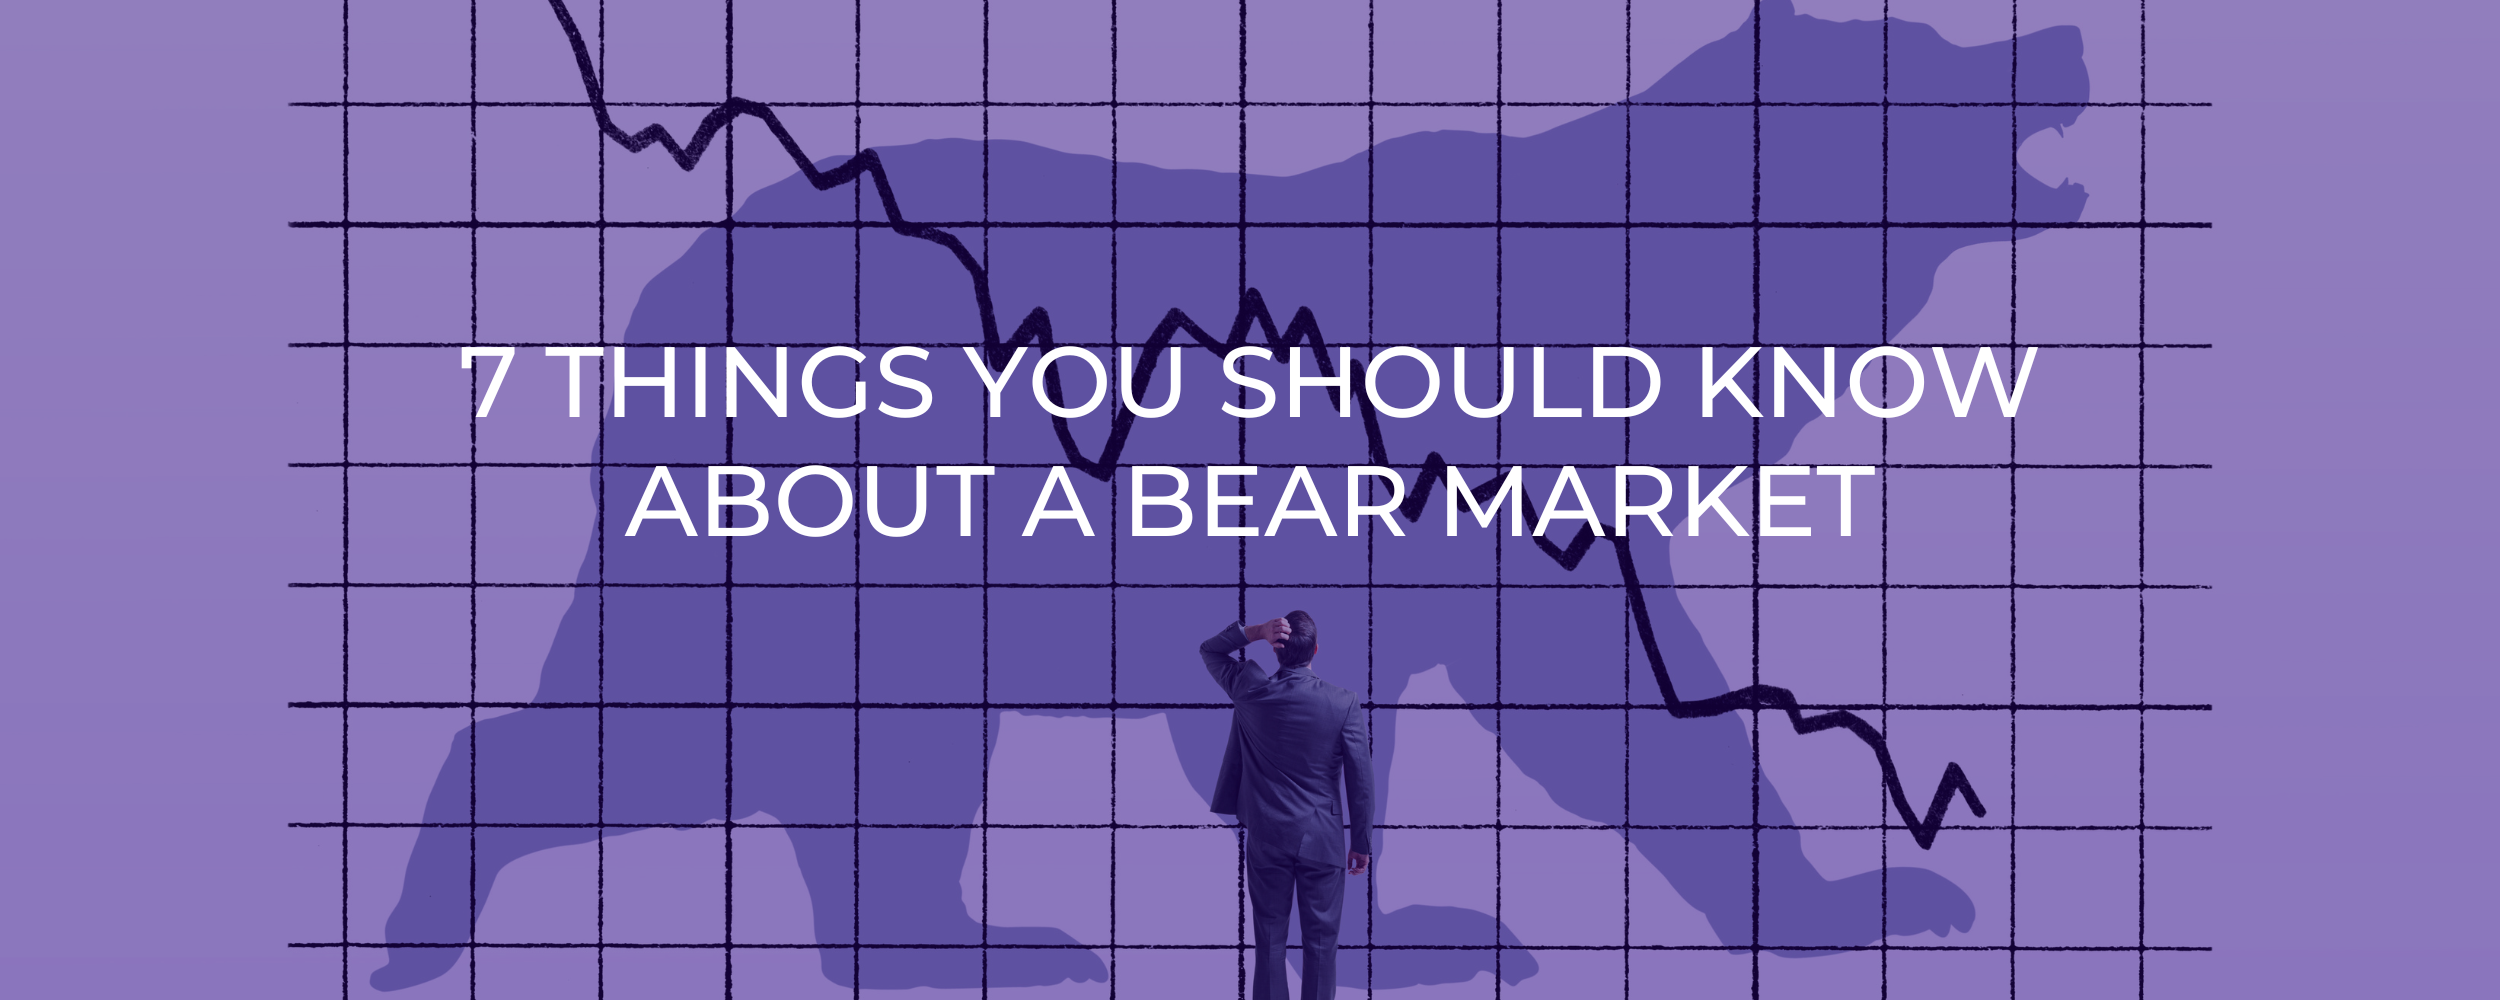 7 Things You Should Know About A Bear Market